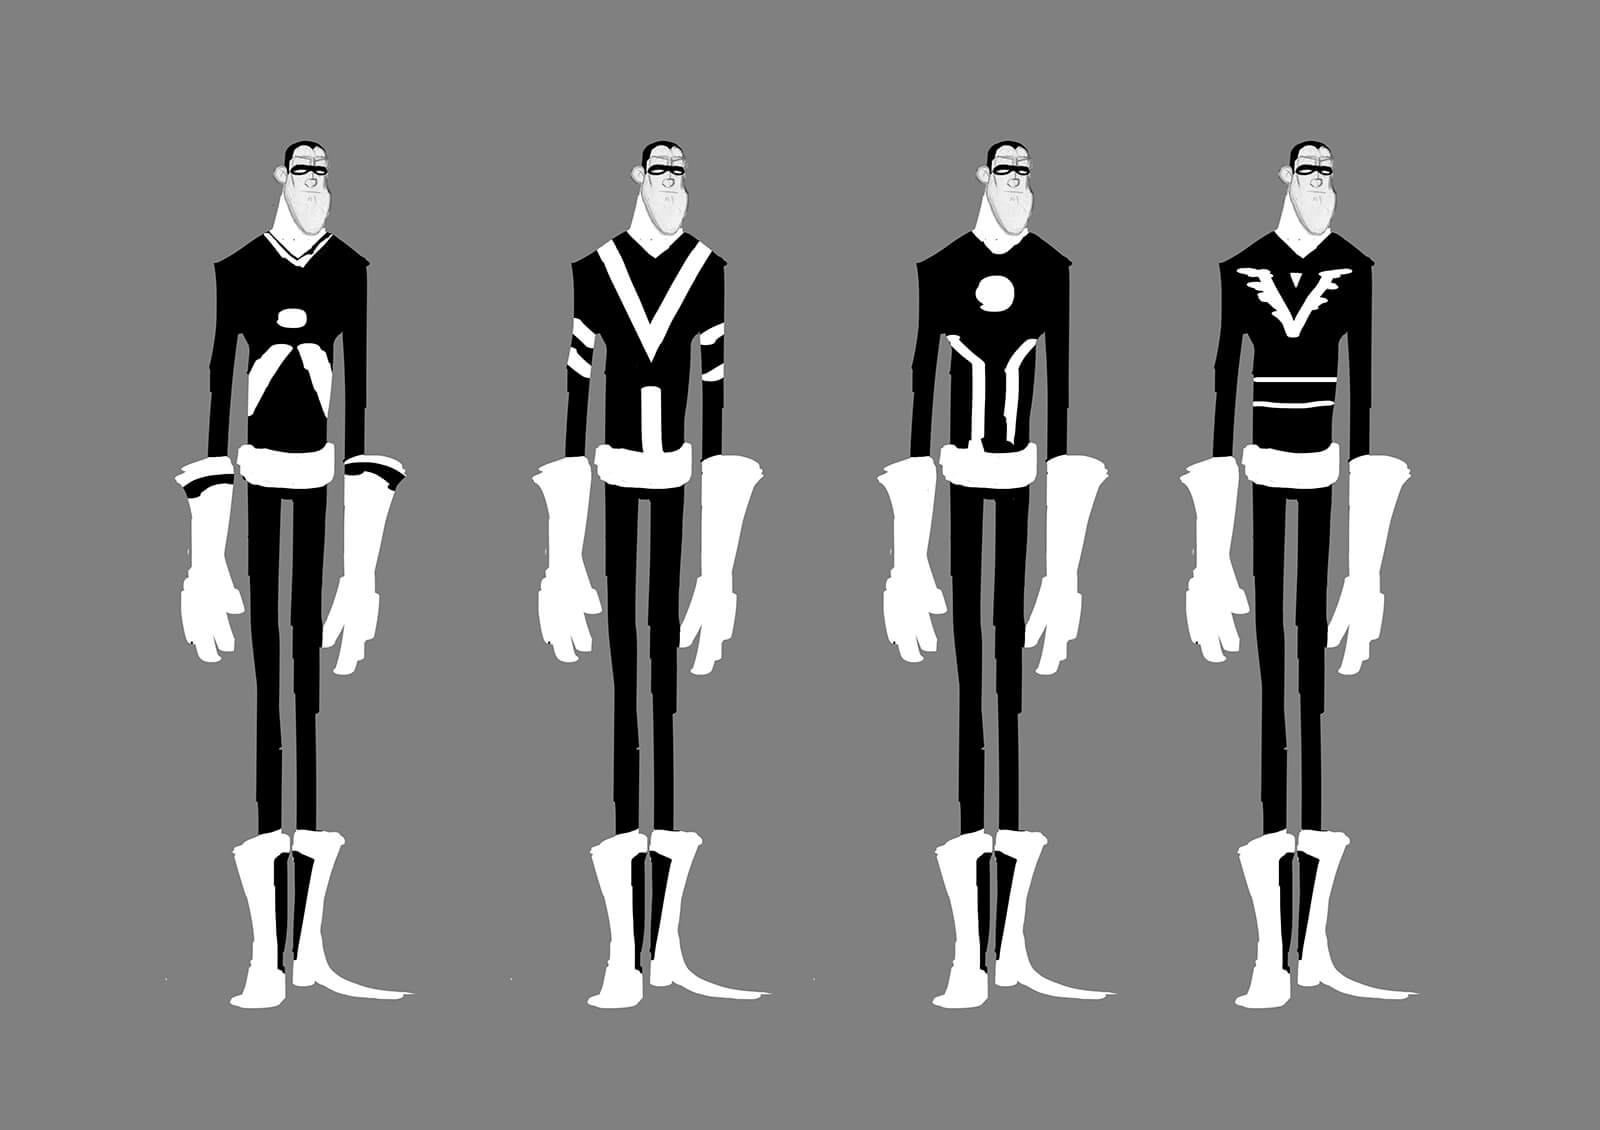 Black-and-white concept sketches or a tall, thin man in a futuristic outfit with differing chest logos standing side to side